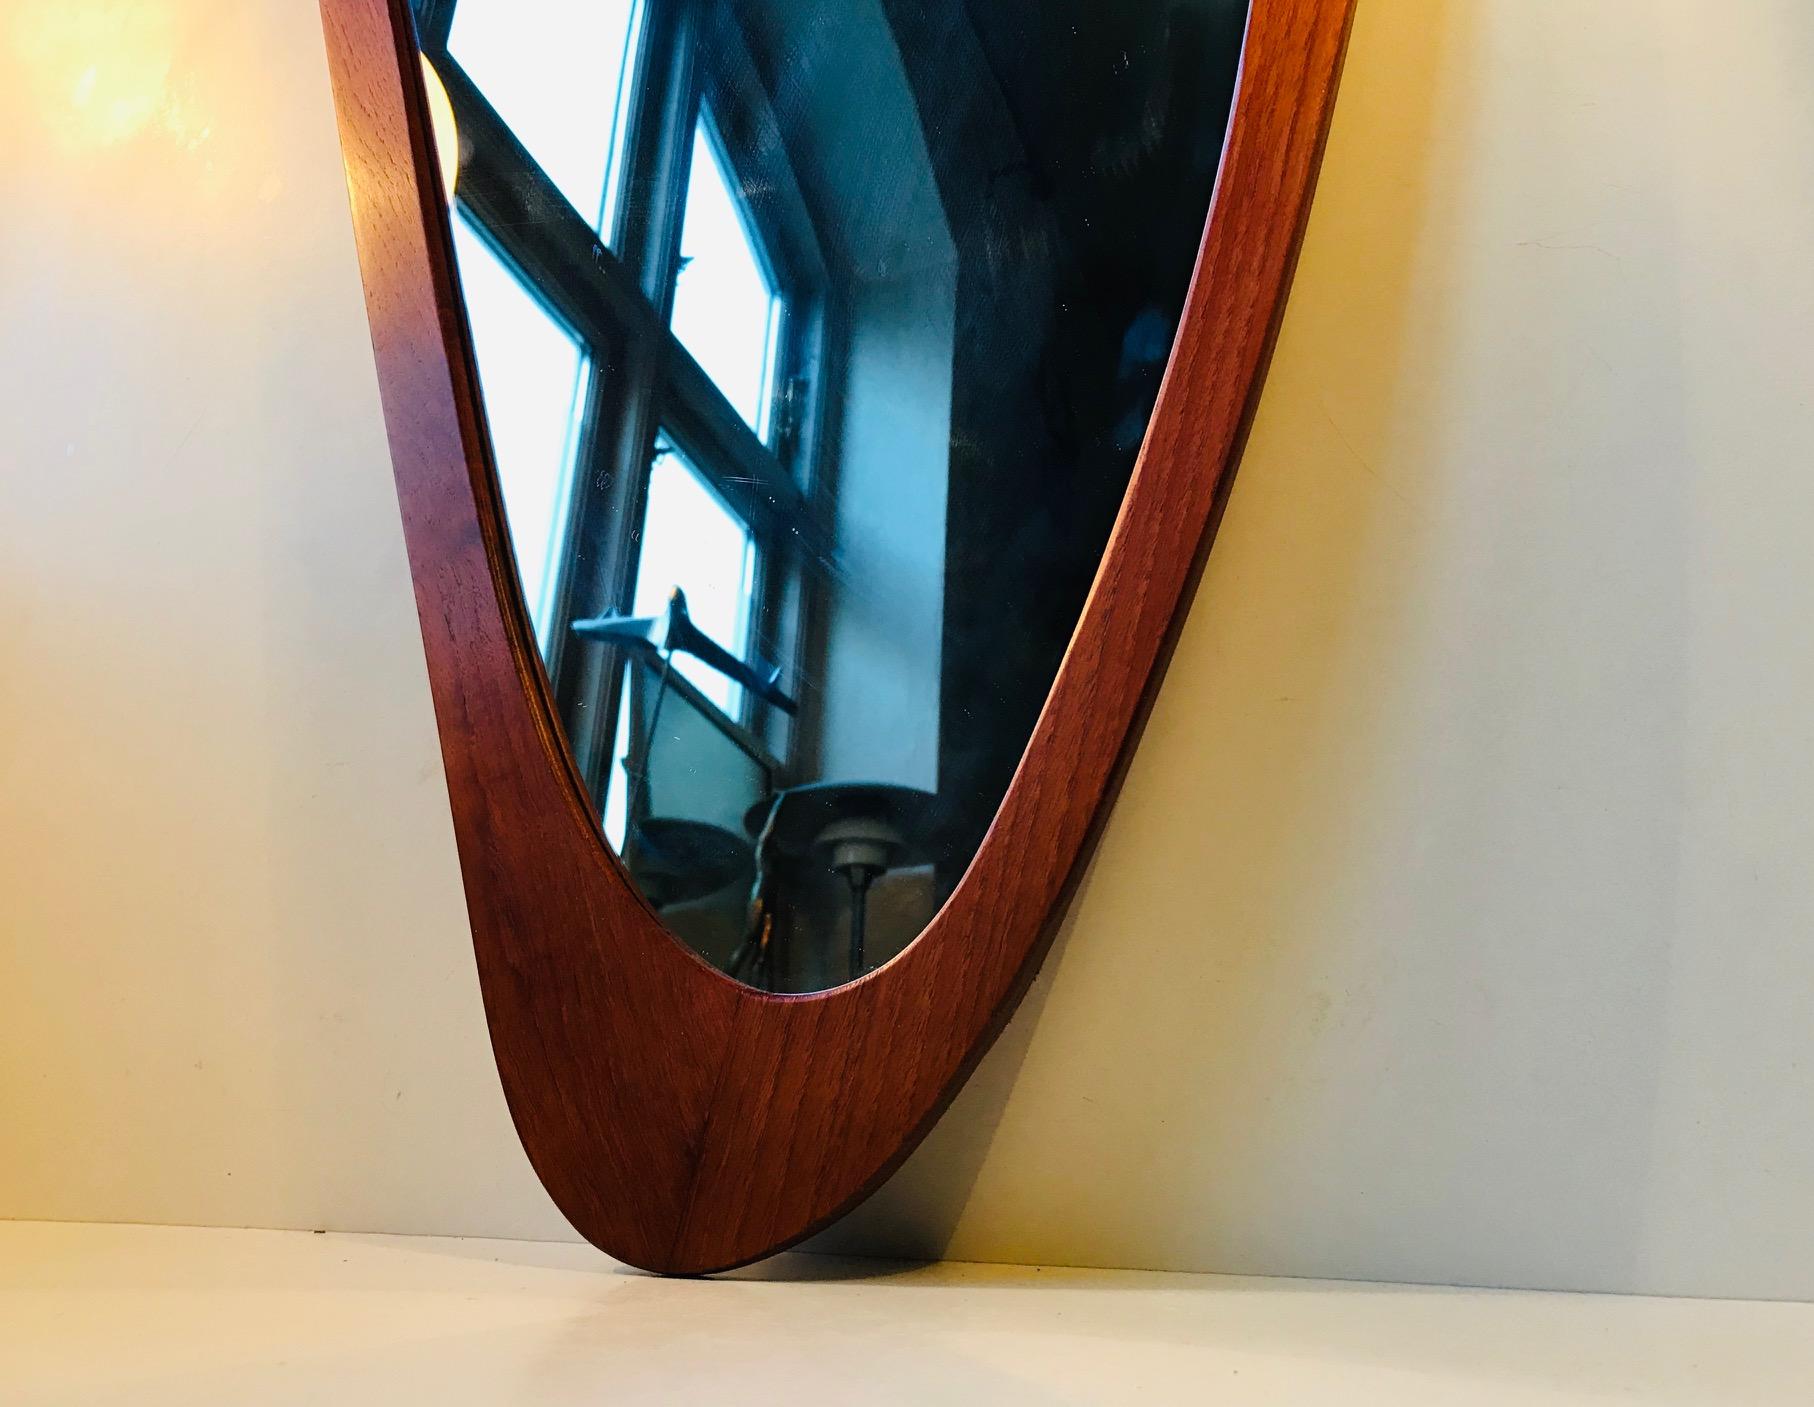 An organically shaped wall hung mirror with solid teak profiles that has been assembled without the use of metal. It was designed by Danish architect Rimbert Sandholdt and manufactured by M. J. Spejle in Denmark during the 1950s. It has remains of